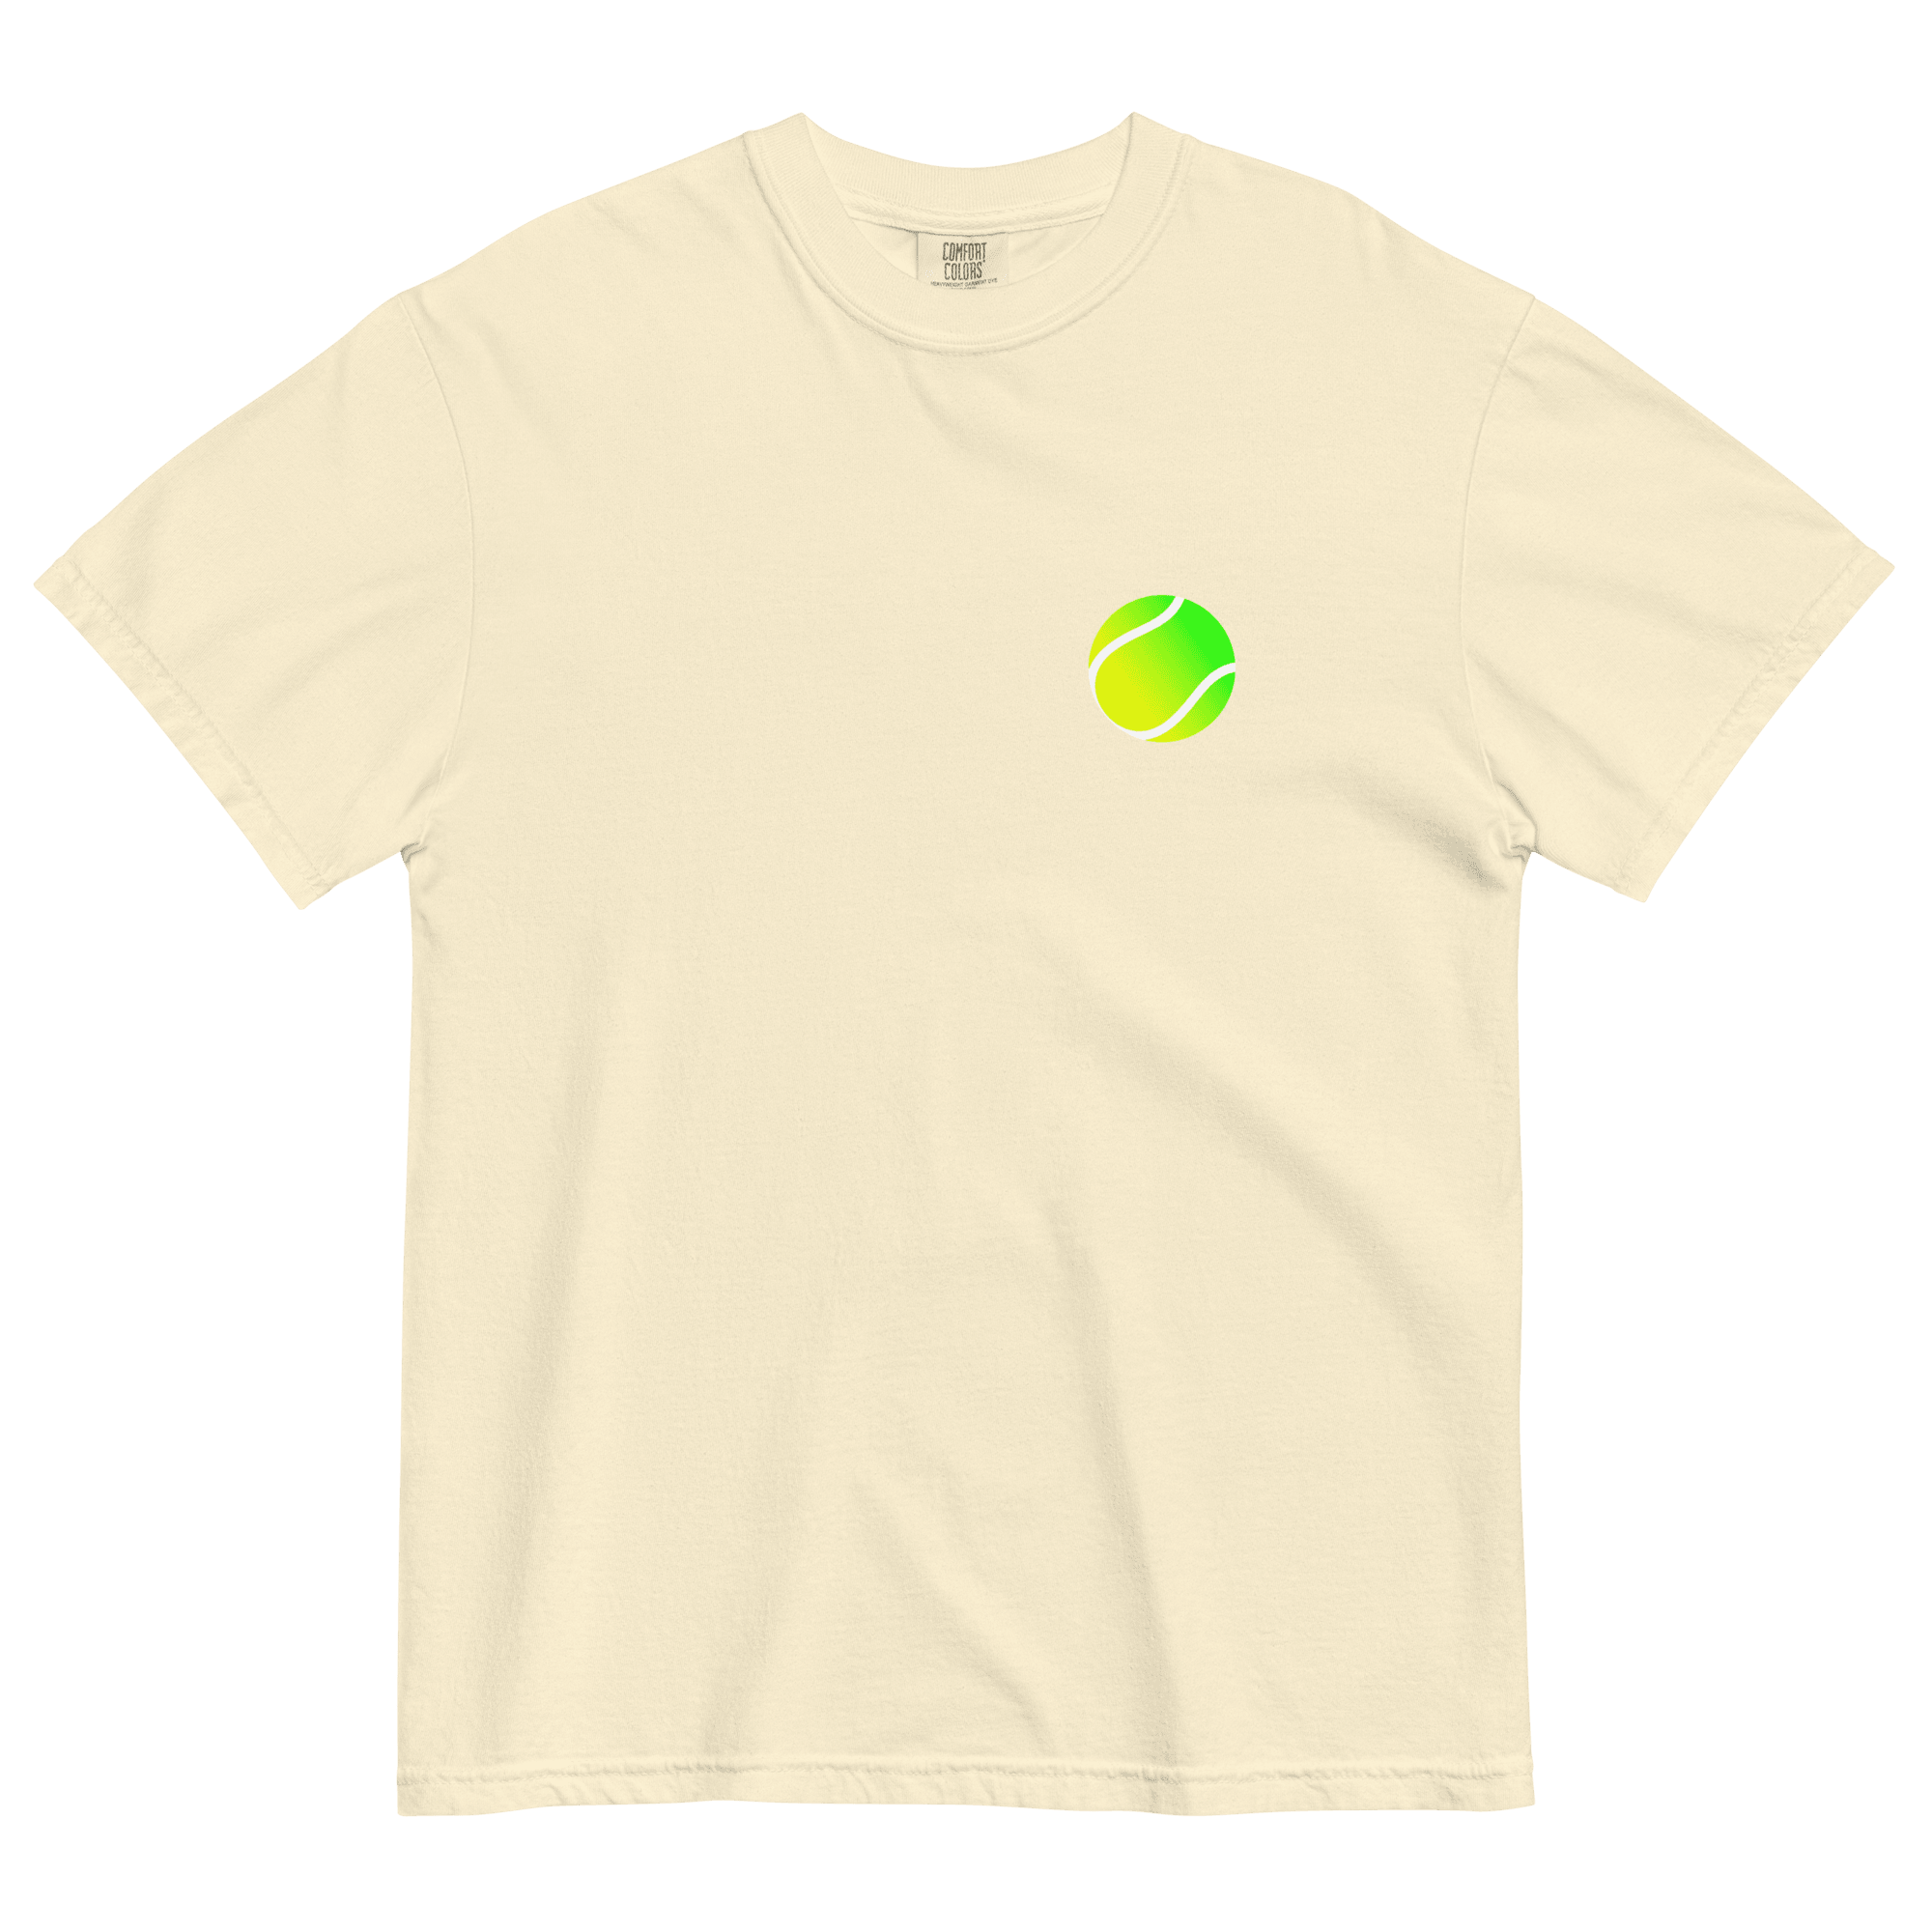 Tennis 🎾 is my Heart Embroidered Shirt - Polychrome Goods 🍊